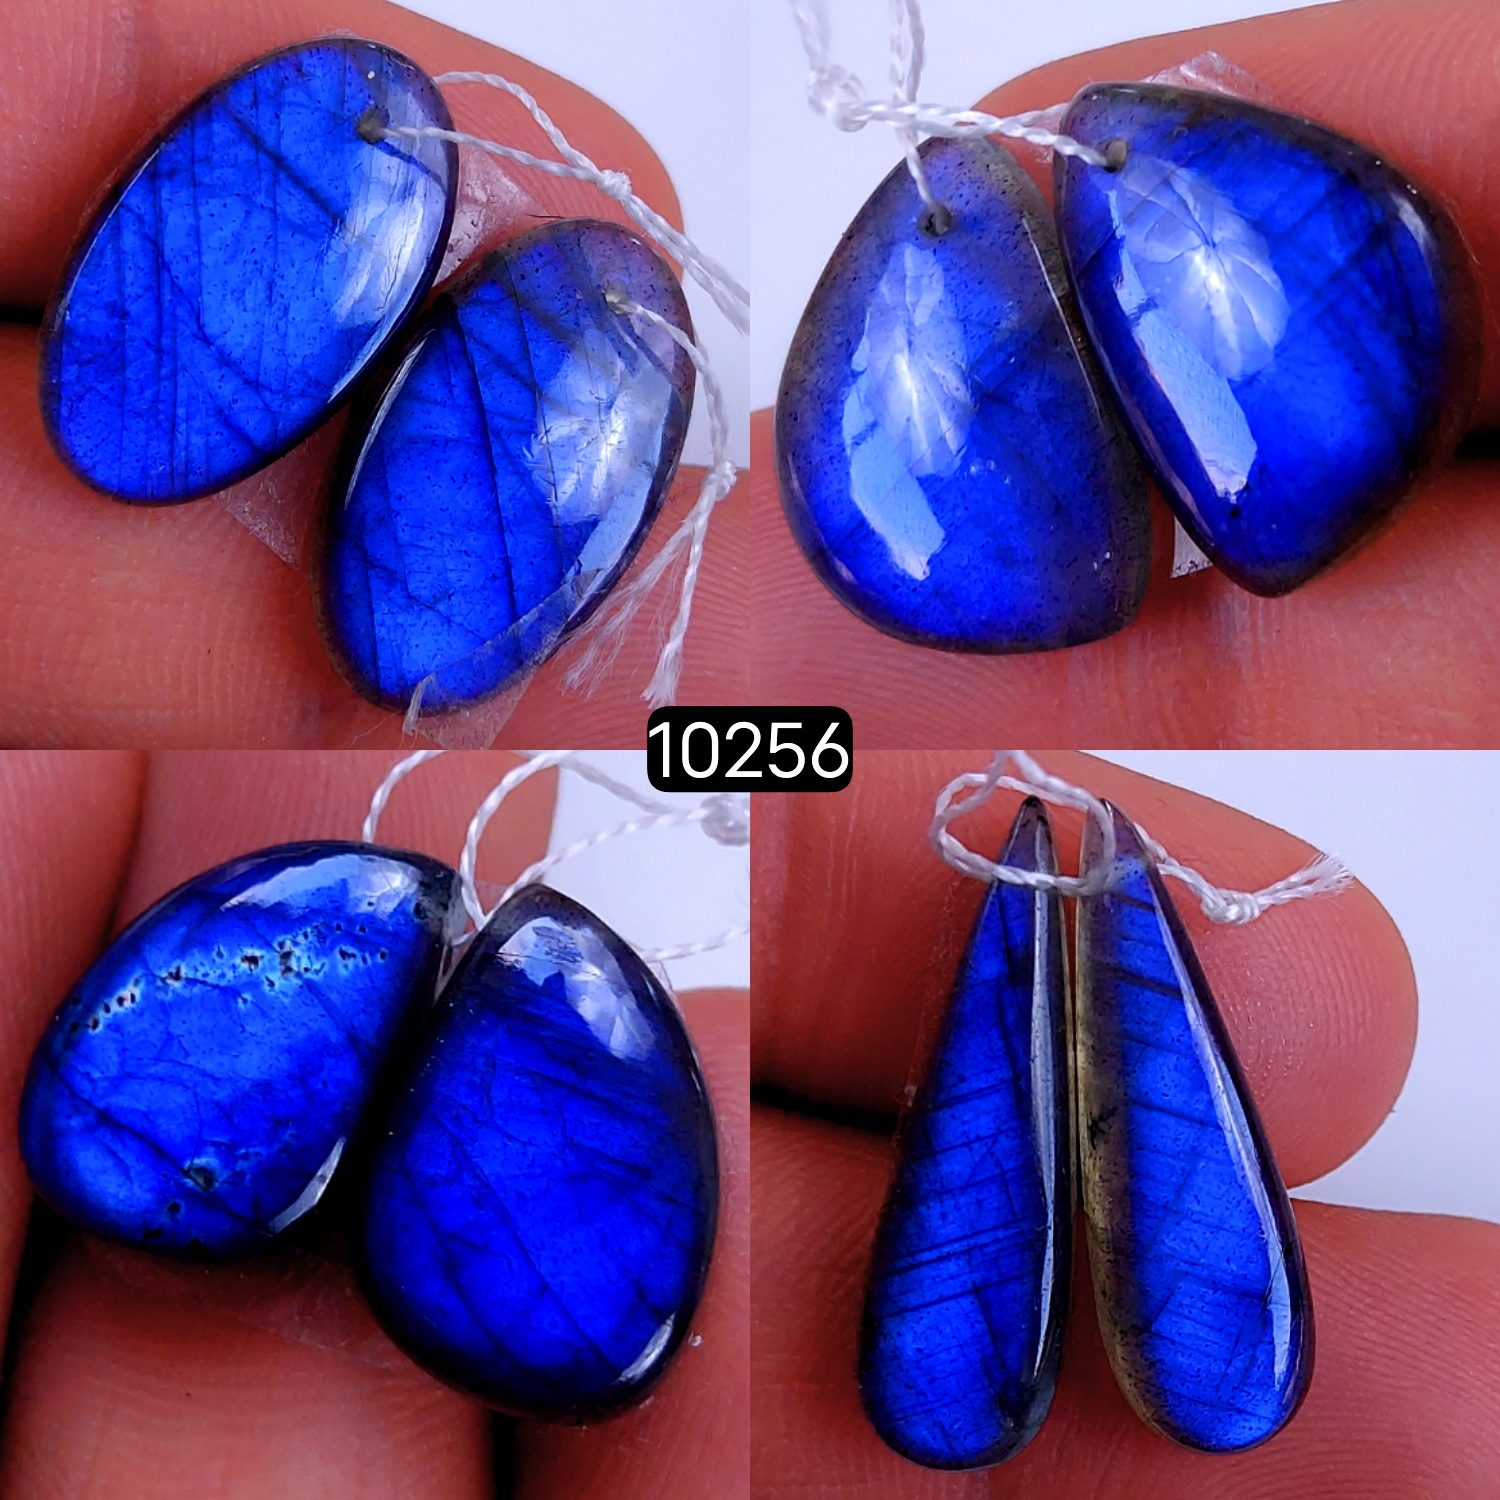 4Pair 71Cts Natural Labradorite Crystal Drill Dangle Drop Earring Pairs Silver Earrings Blue Labradorite Hoop Jewelry  25x9 17x12mm #10256